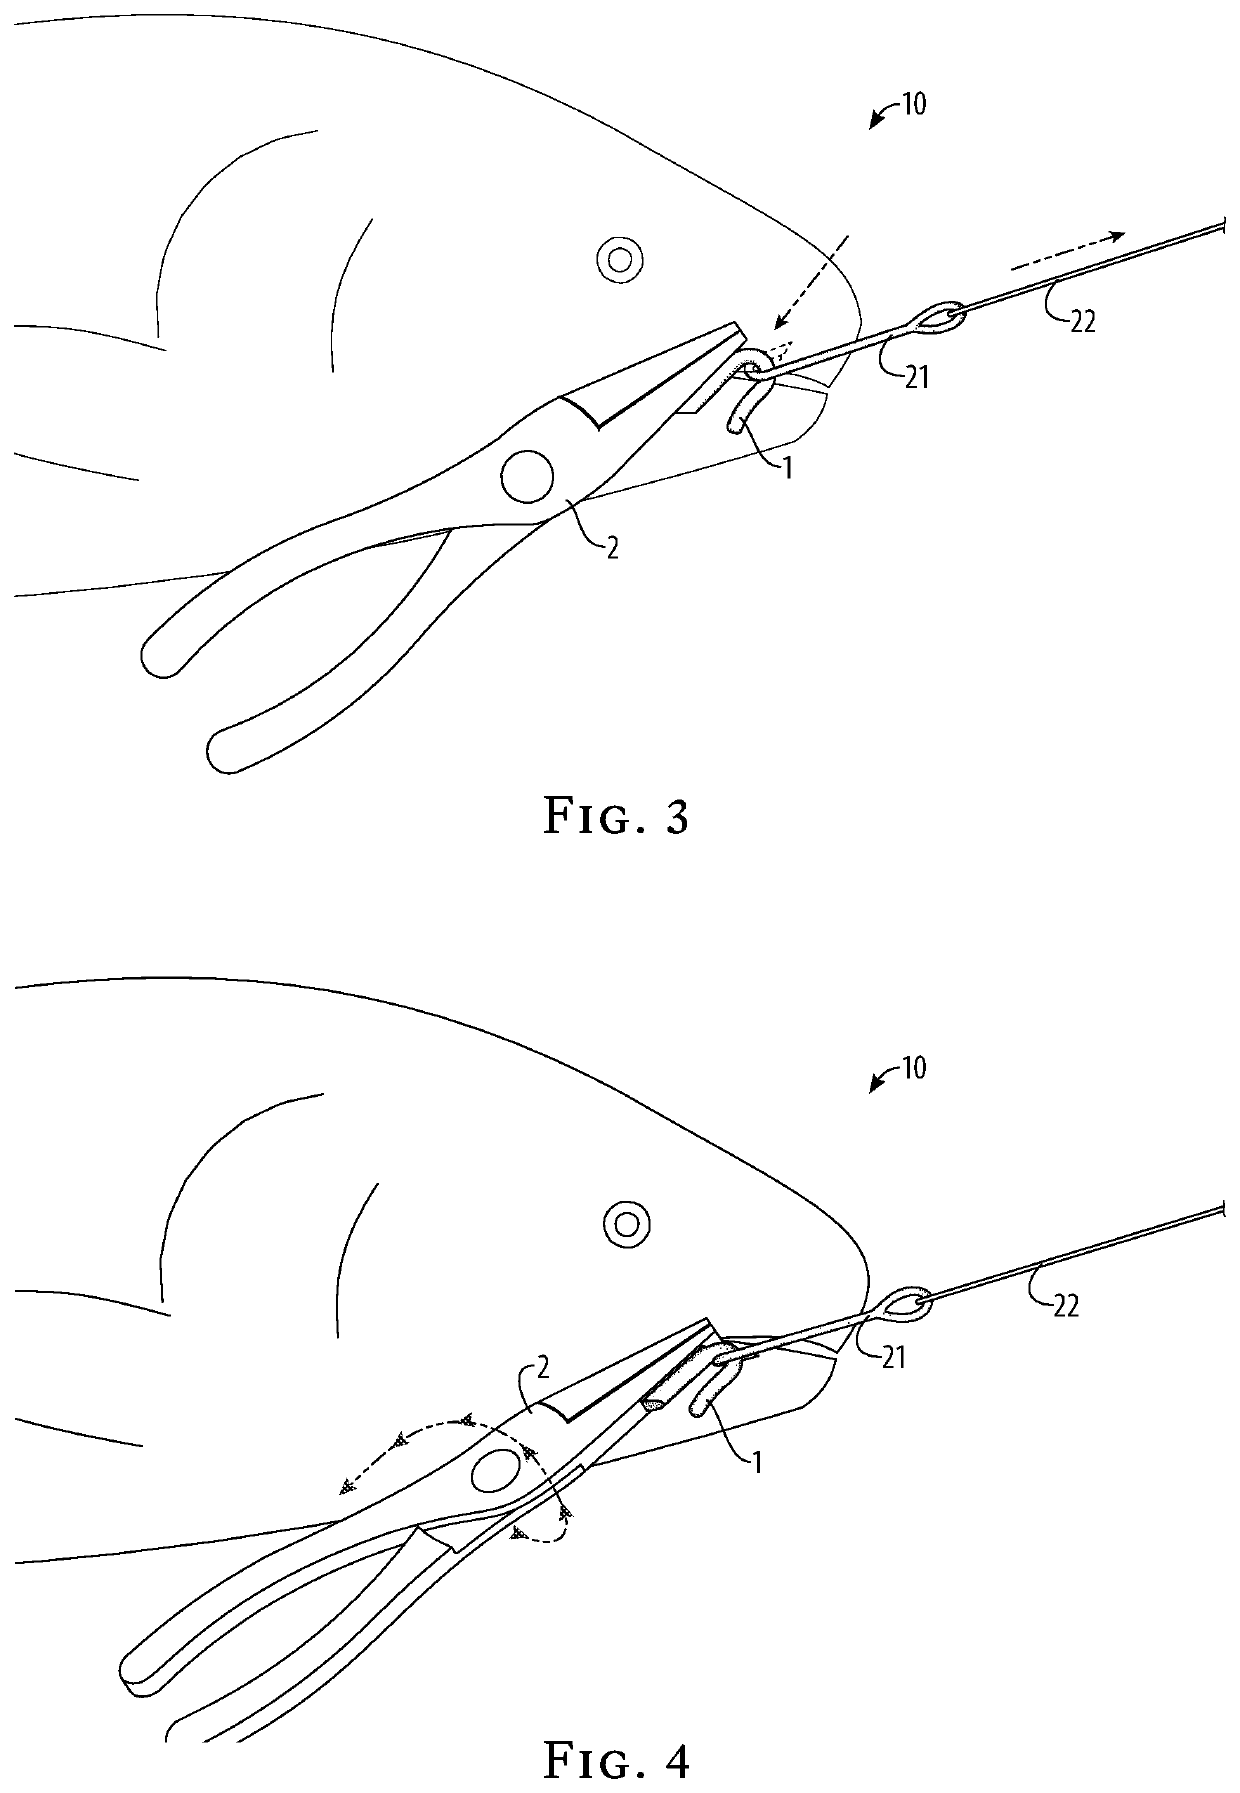 Fishhook removal device and method